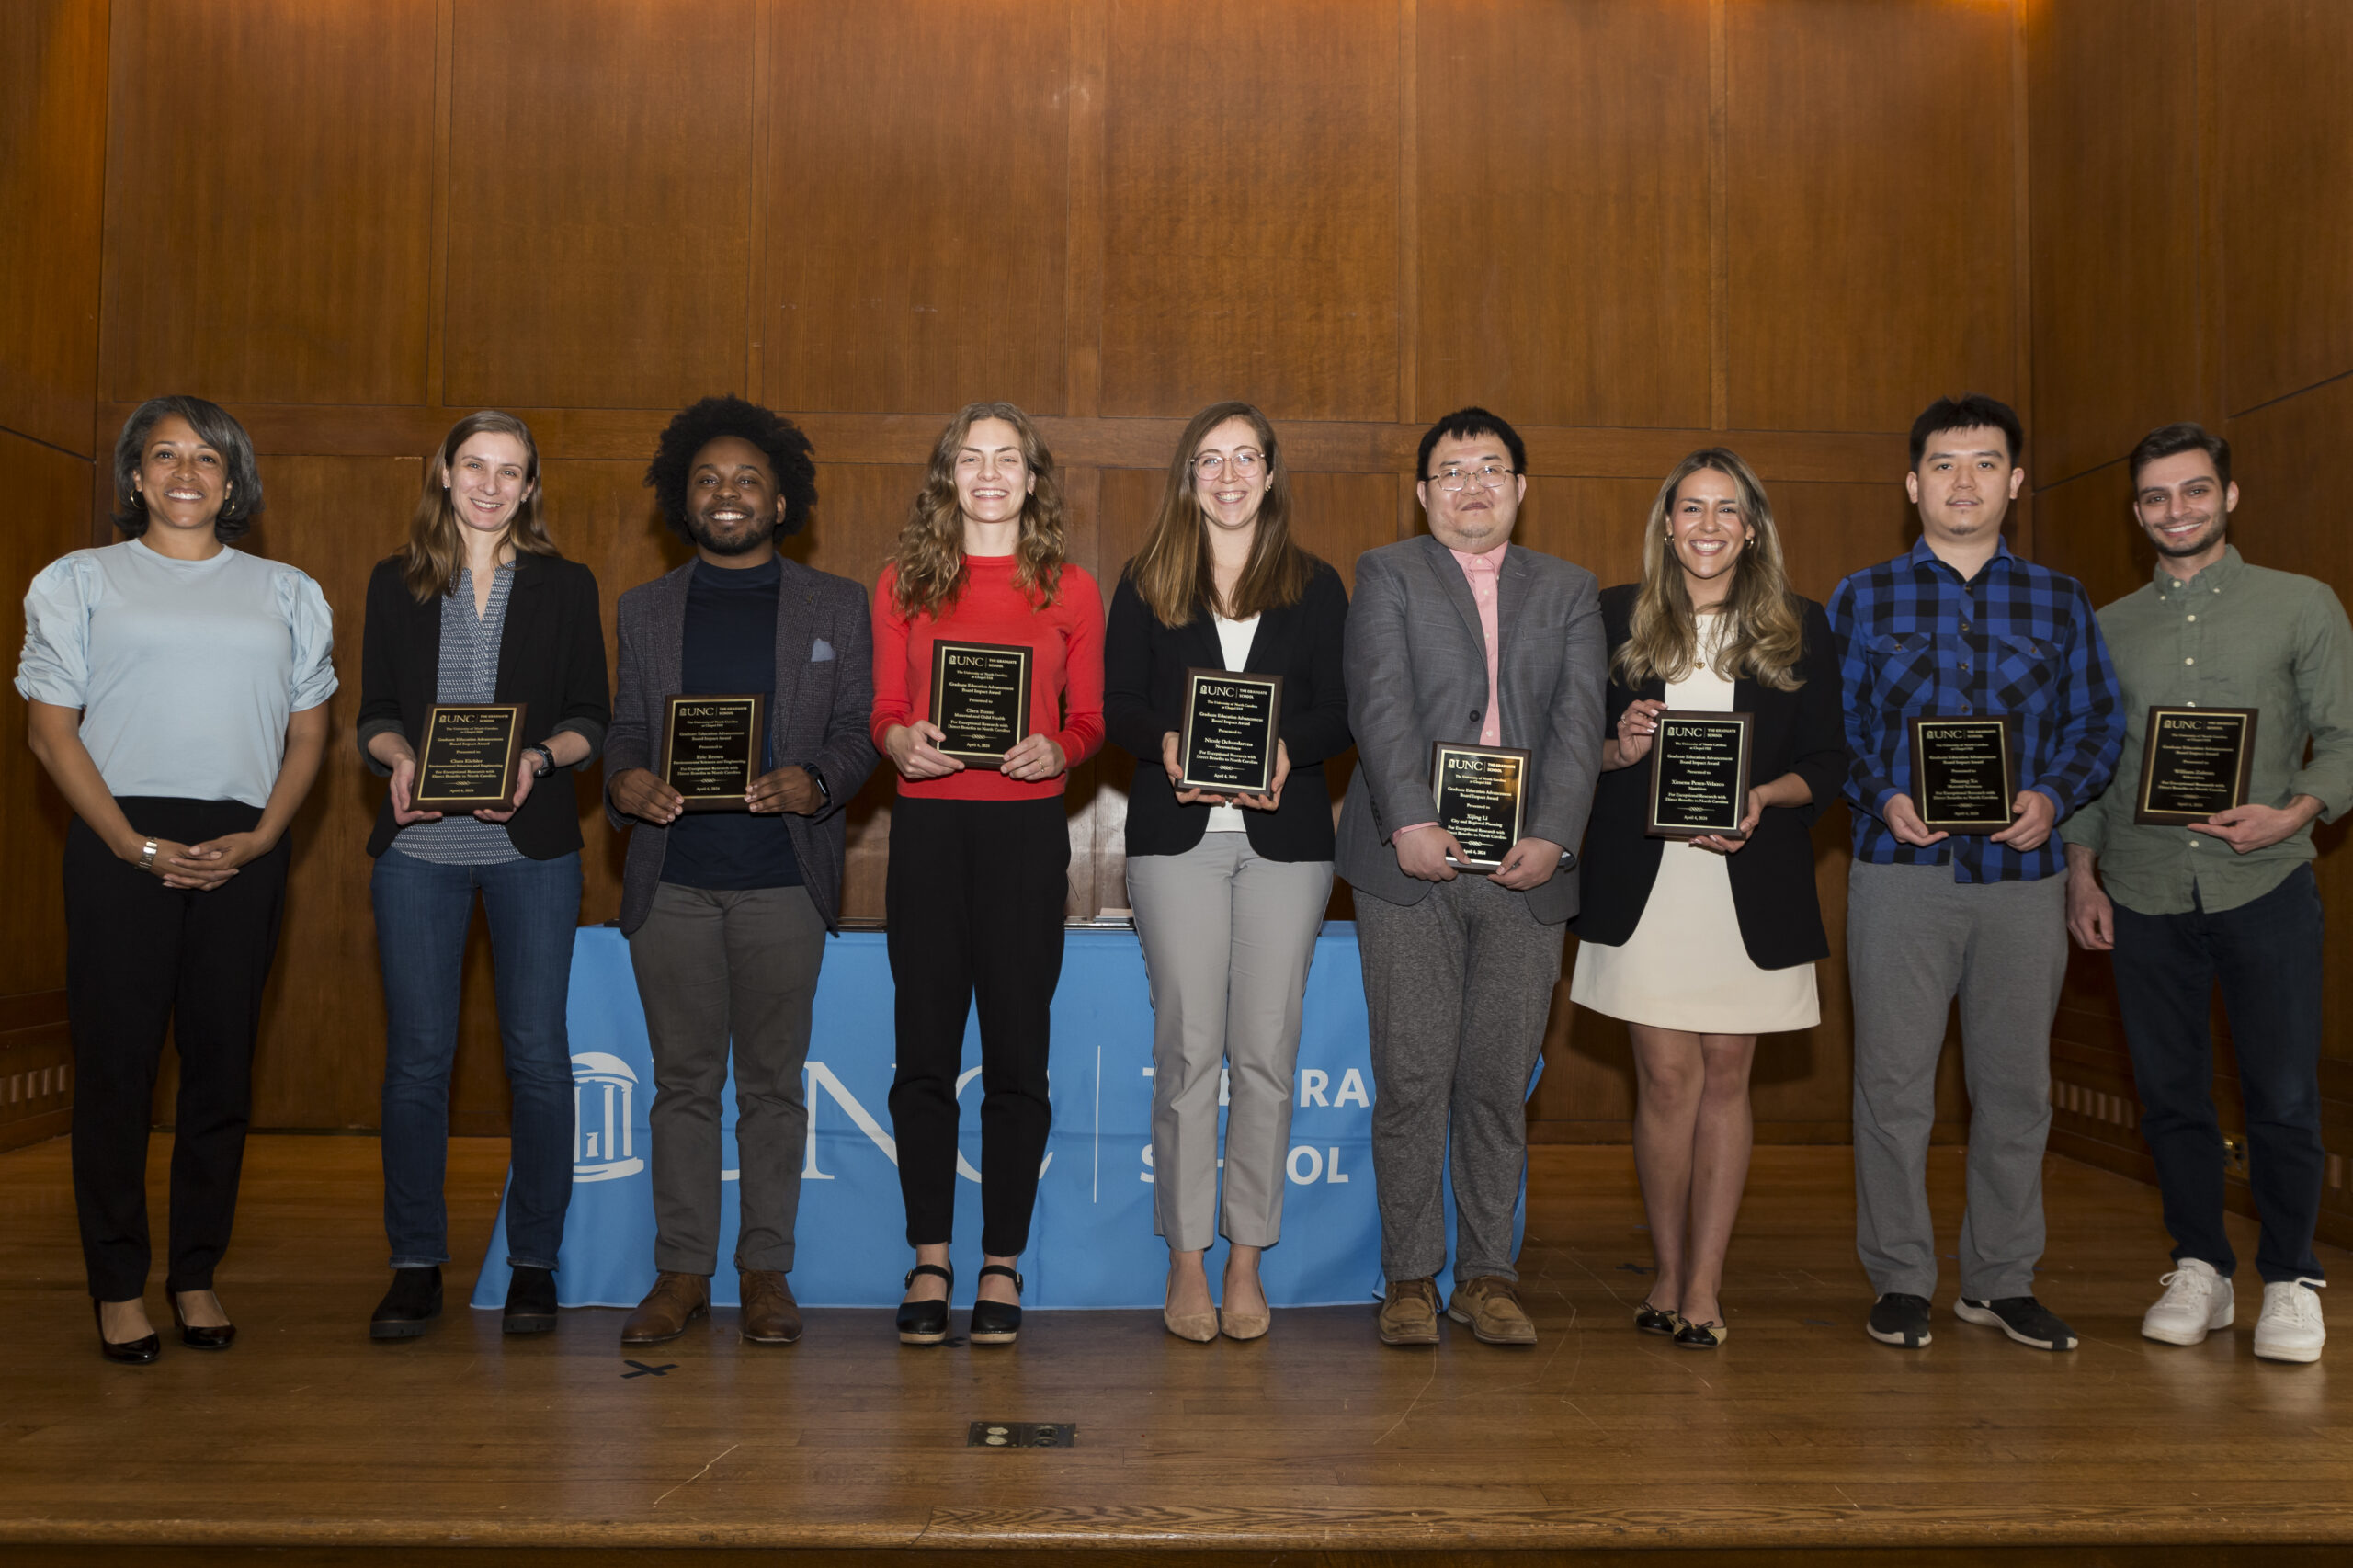 The Graduate School honors graduate student achievements at 26th annual recognition celebration